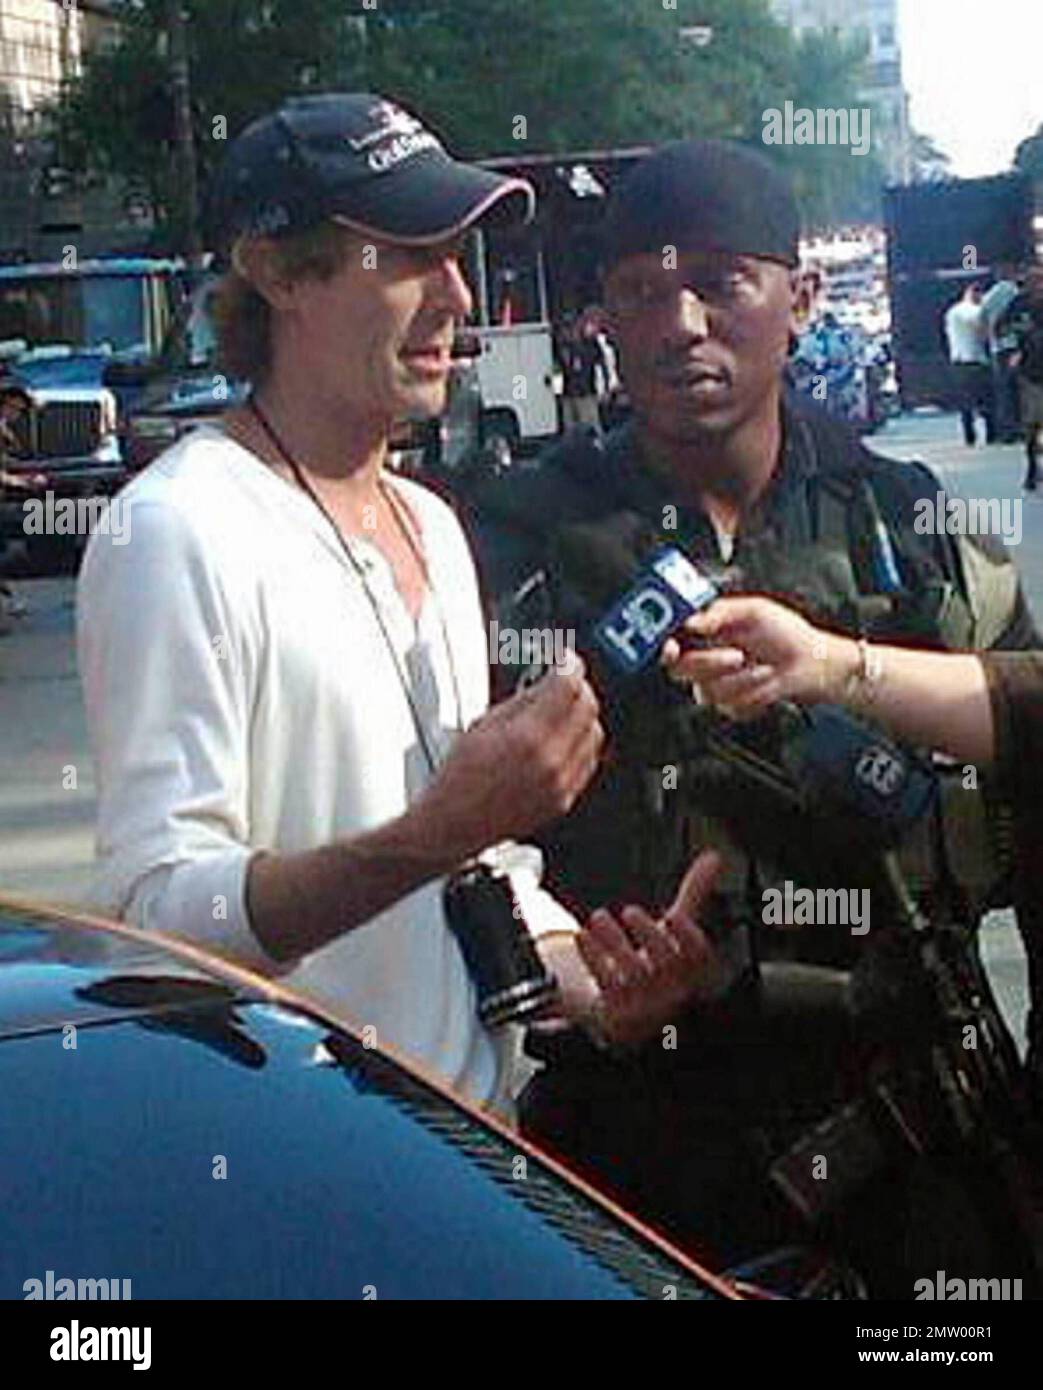 Director Michael Bay and actor Tyrese Gibson talk with the media during a break from filming on the Chicago set of 'Transformers 3'.  Bay, who is rumored to be difficult on set, thanked fans who came out to support them despite the summer heat. Chicago, IL. 07/18/10. Stock Photo